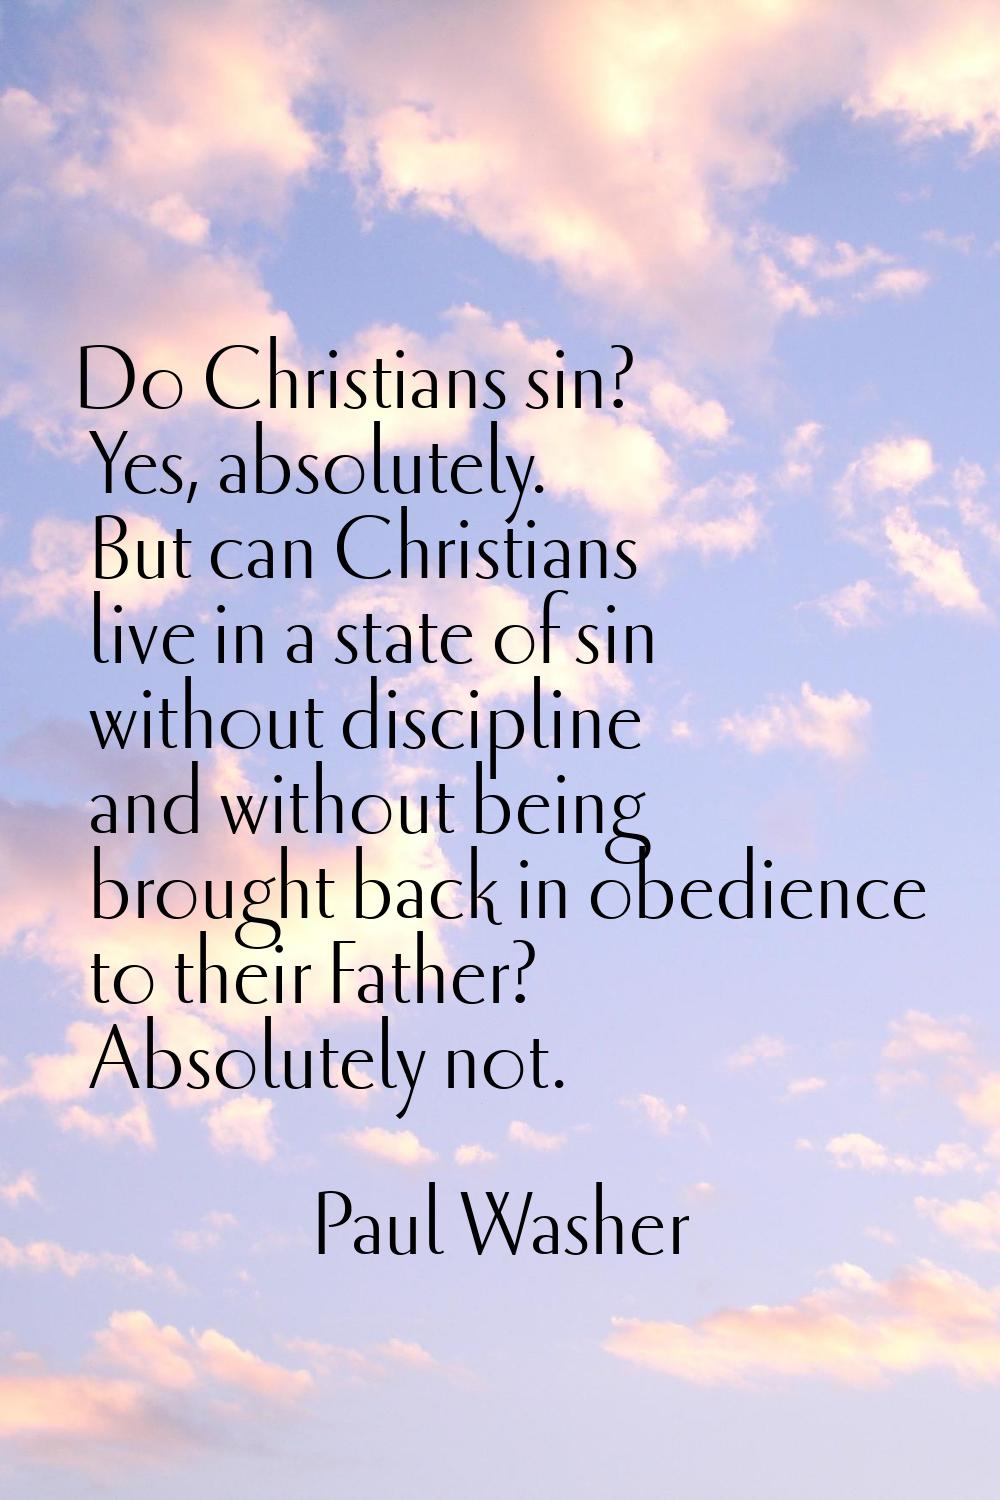 Do Christians sin? Yes, absolutely. But can Christians live in a state of sin without discipline an